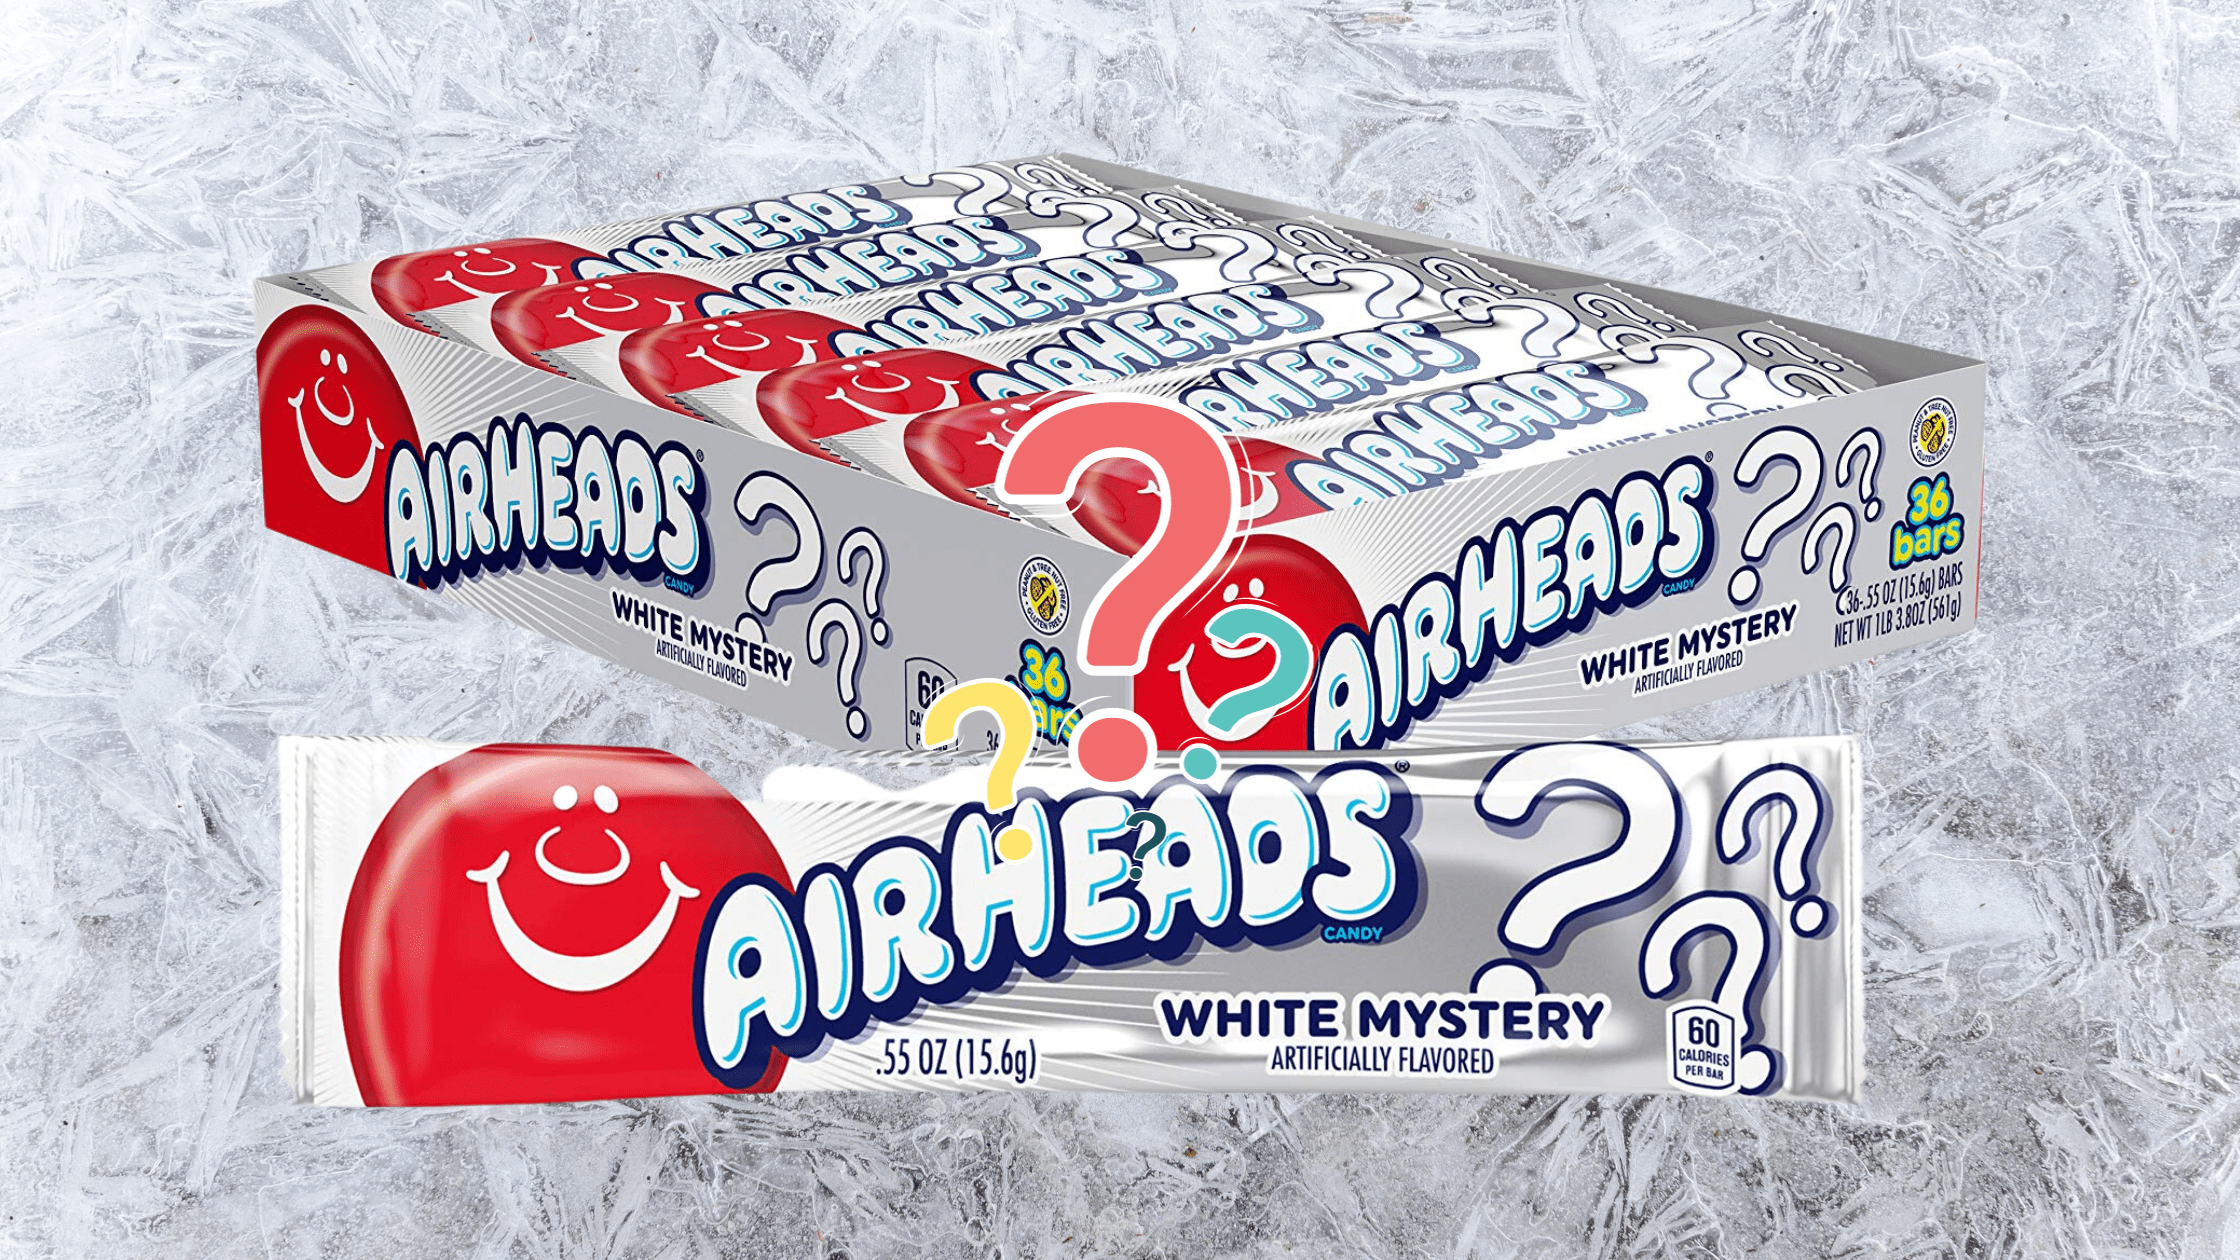 The Secret Behind the Mysterious Airheads Mystery Flavor